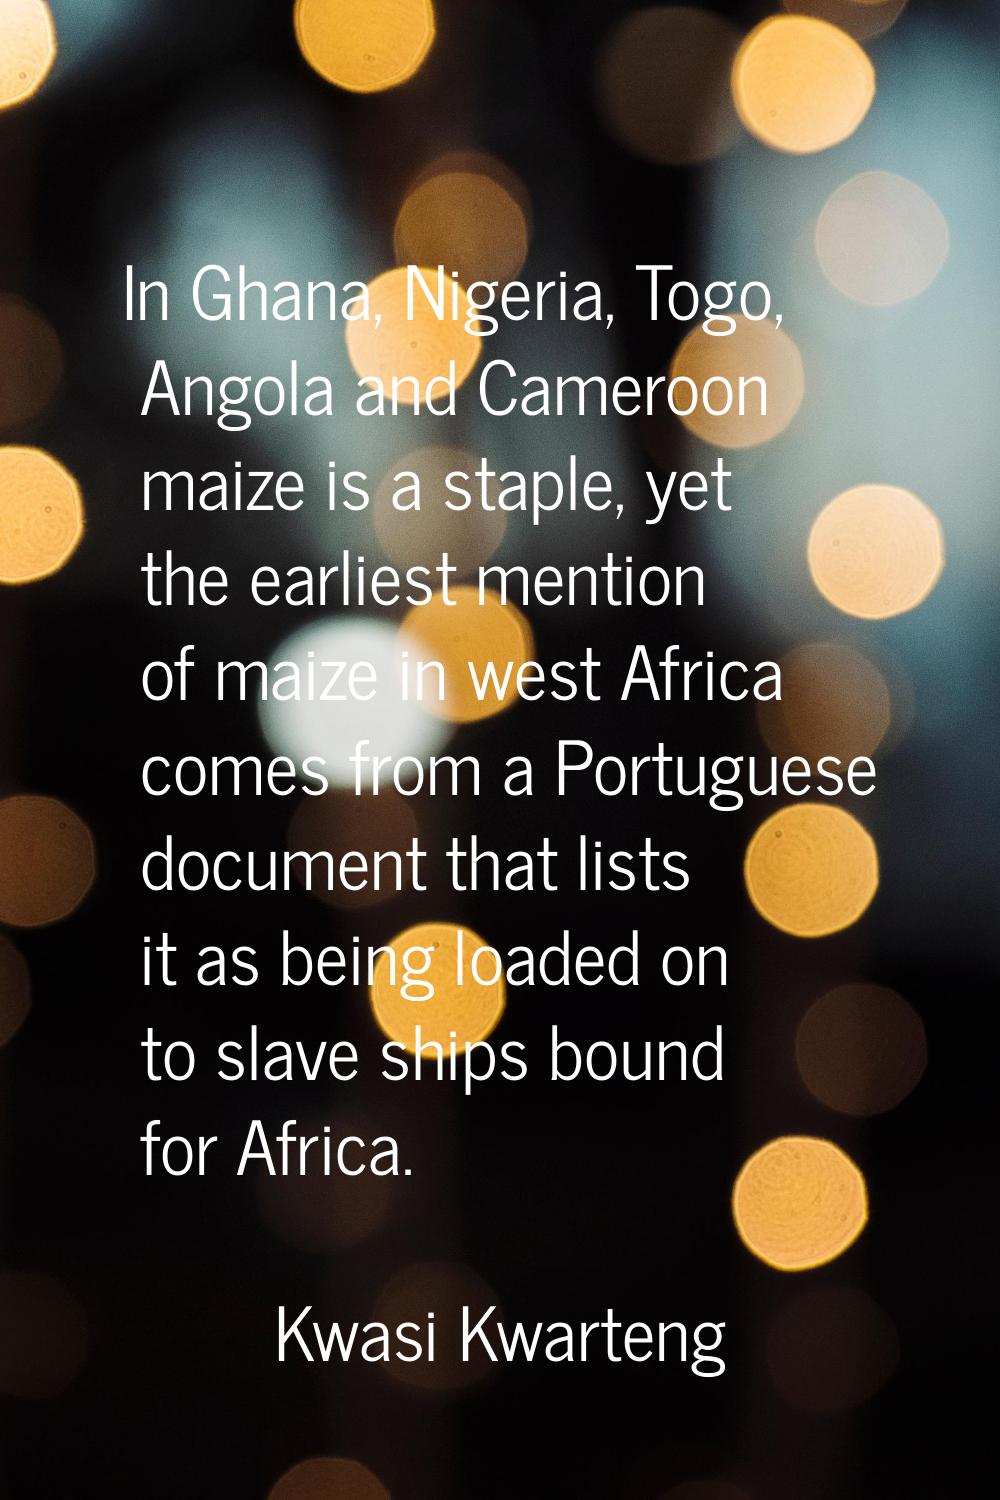 In Ghana, Nigeria, Togo, Angola and Cameroon maize is a staple, yet the earliest mention of maize i